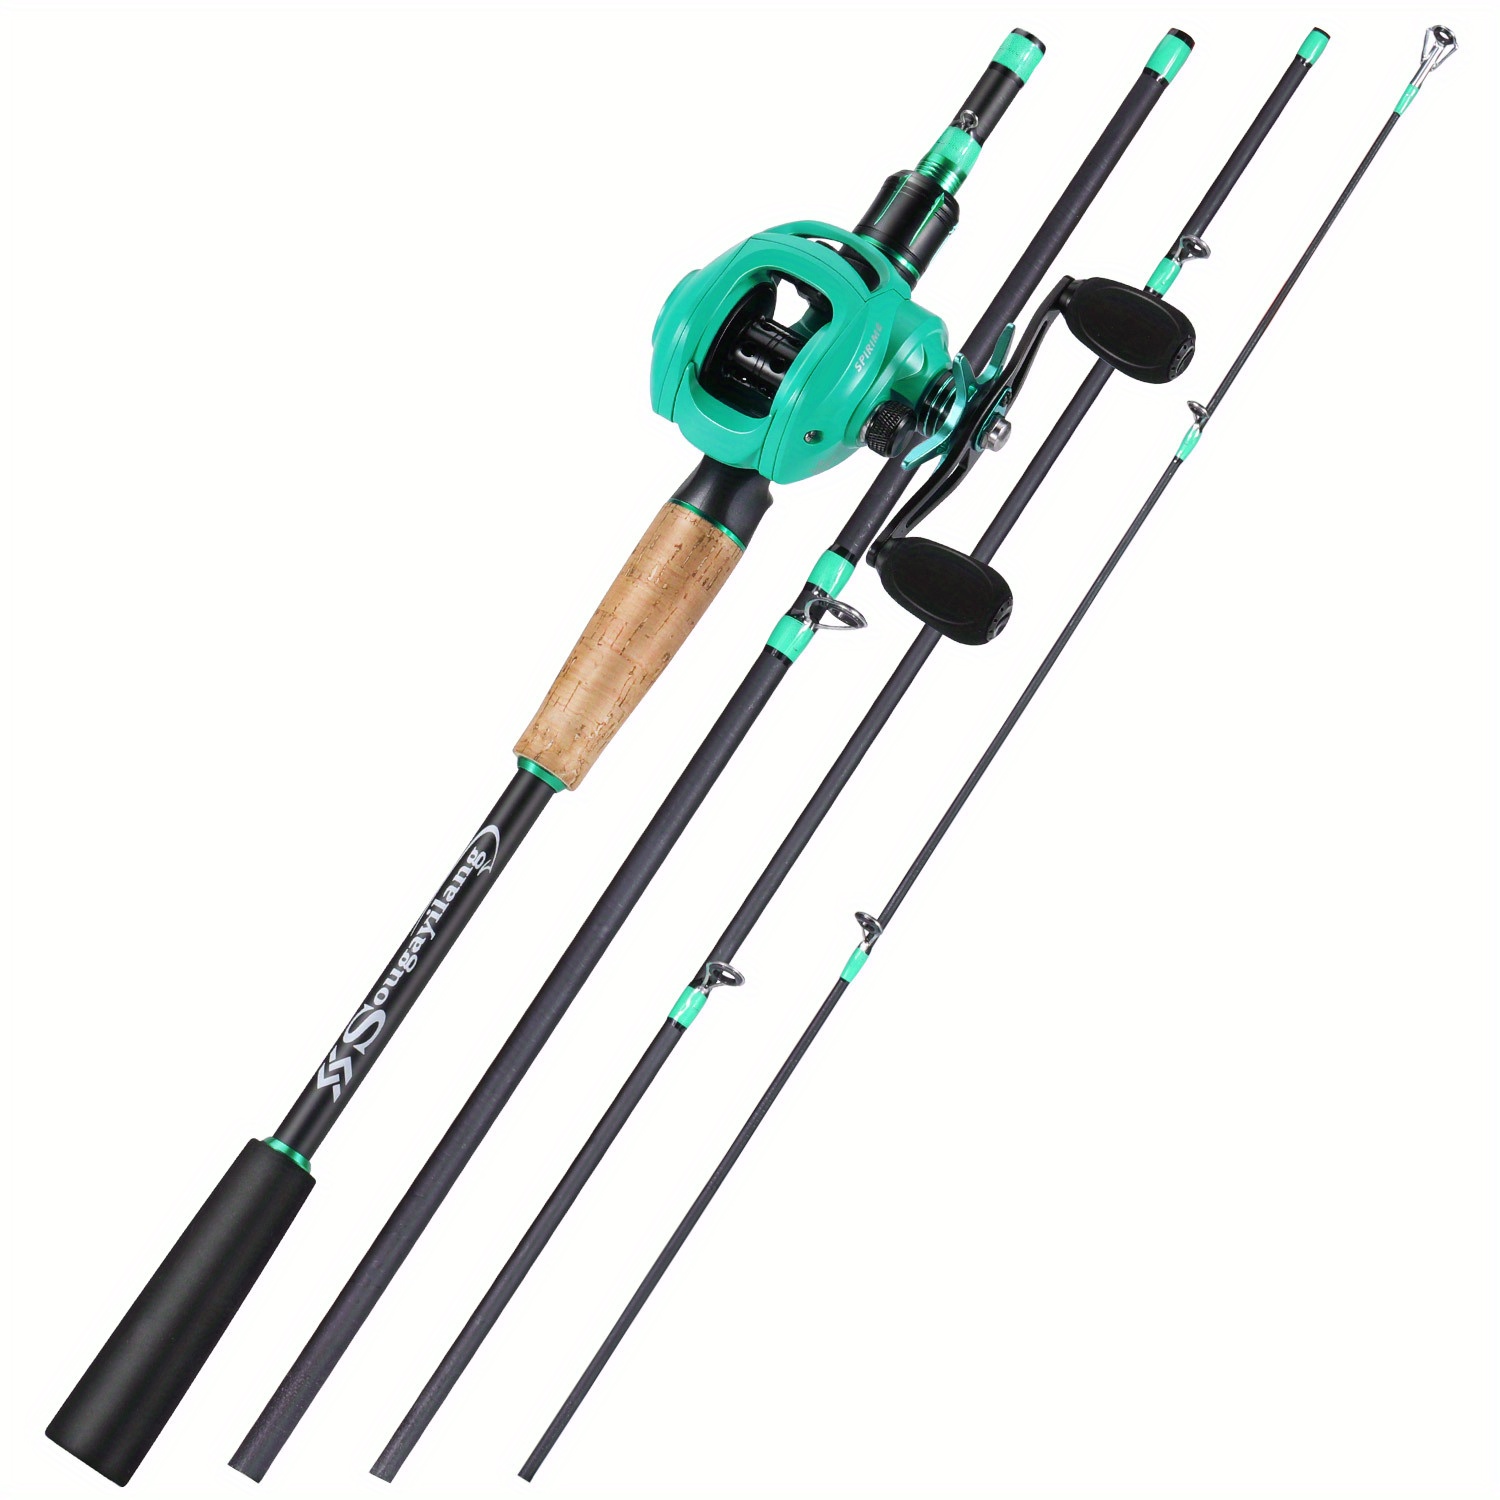 Sougayilang Fly Fishing Rod And Reel Combos Lightweight Ultra Portable Fly  Fishing Pole With Aluminum Alloy 5 6 Fly Reel For Trout Salmon Carp Pikes F  Prices, Shop Deals Online